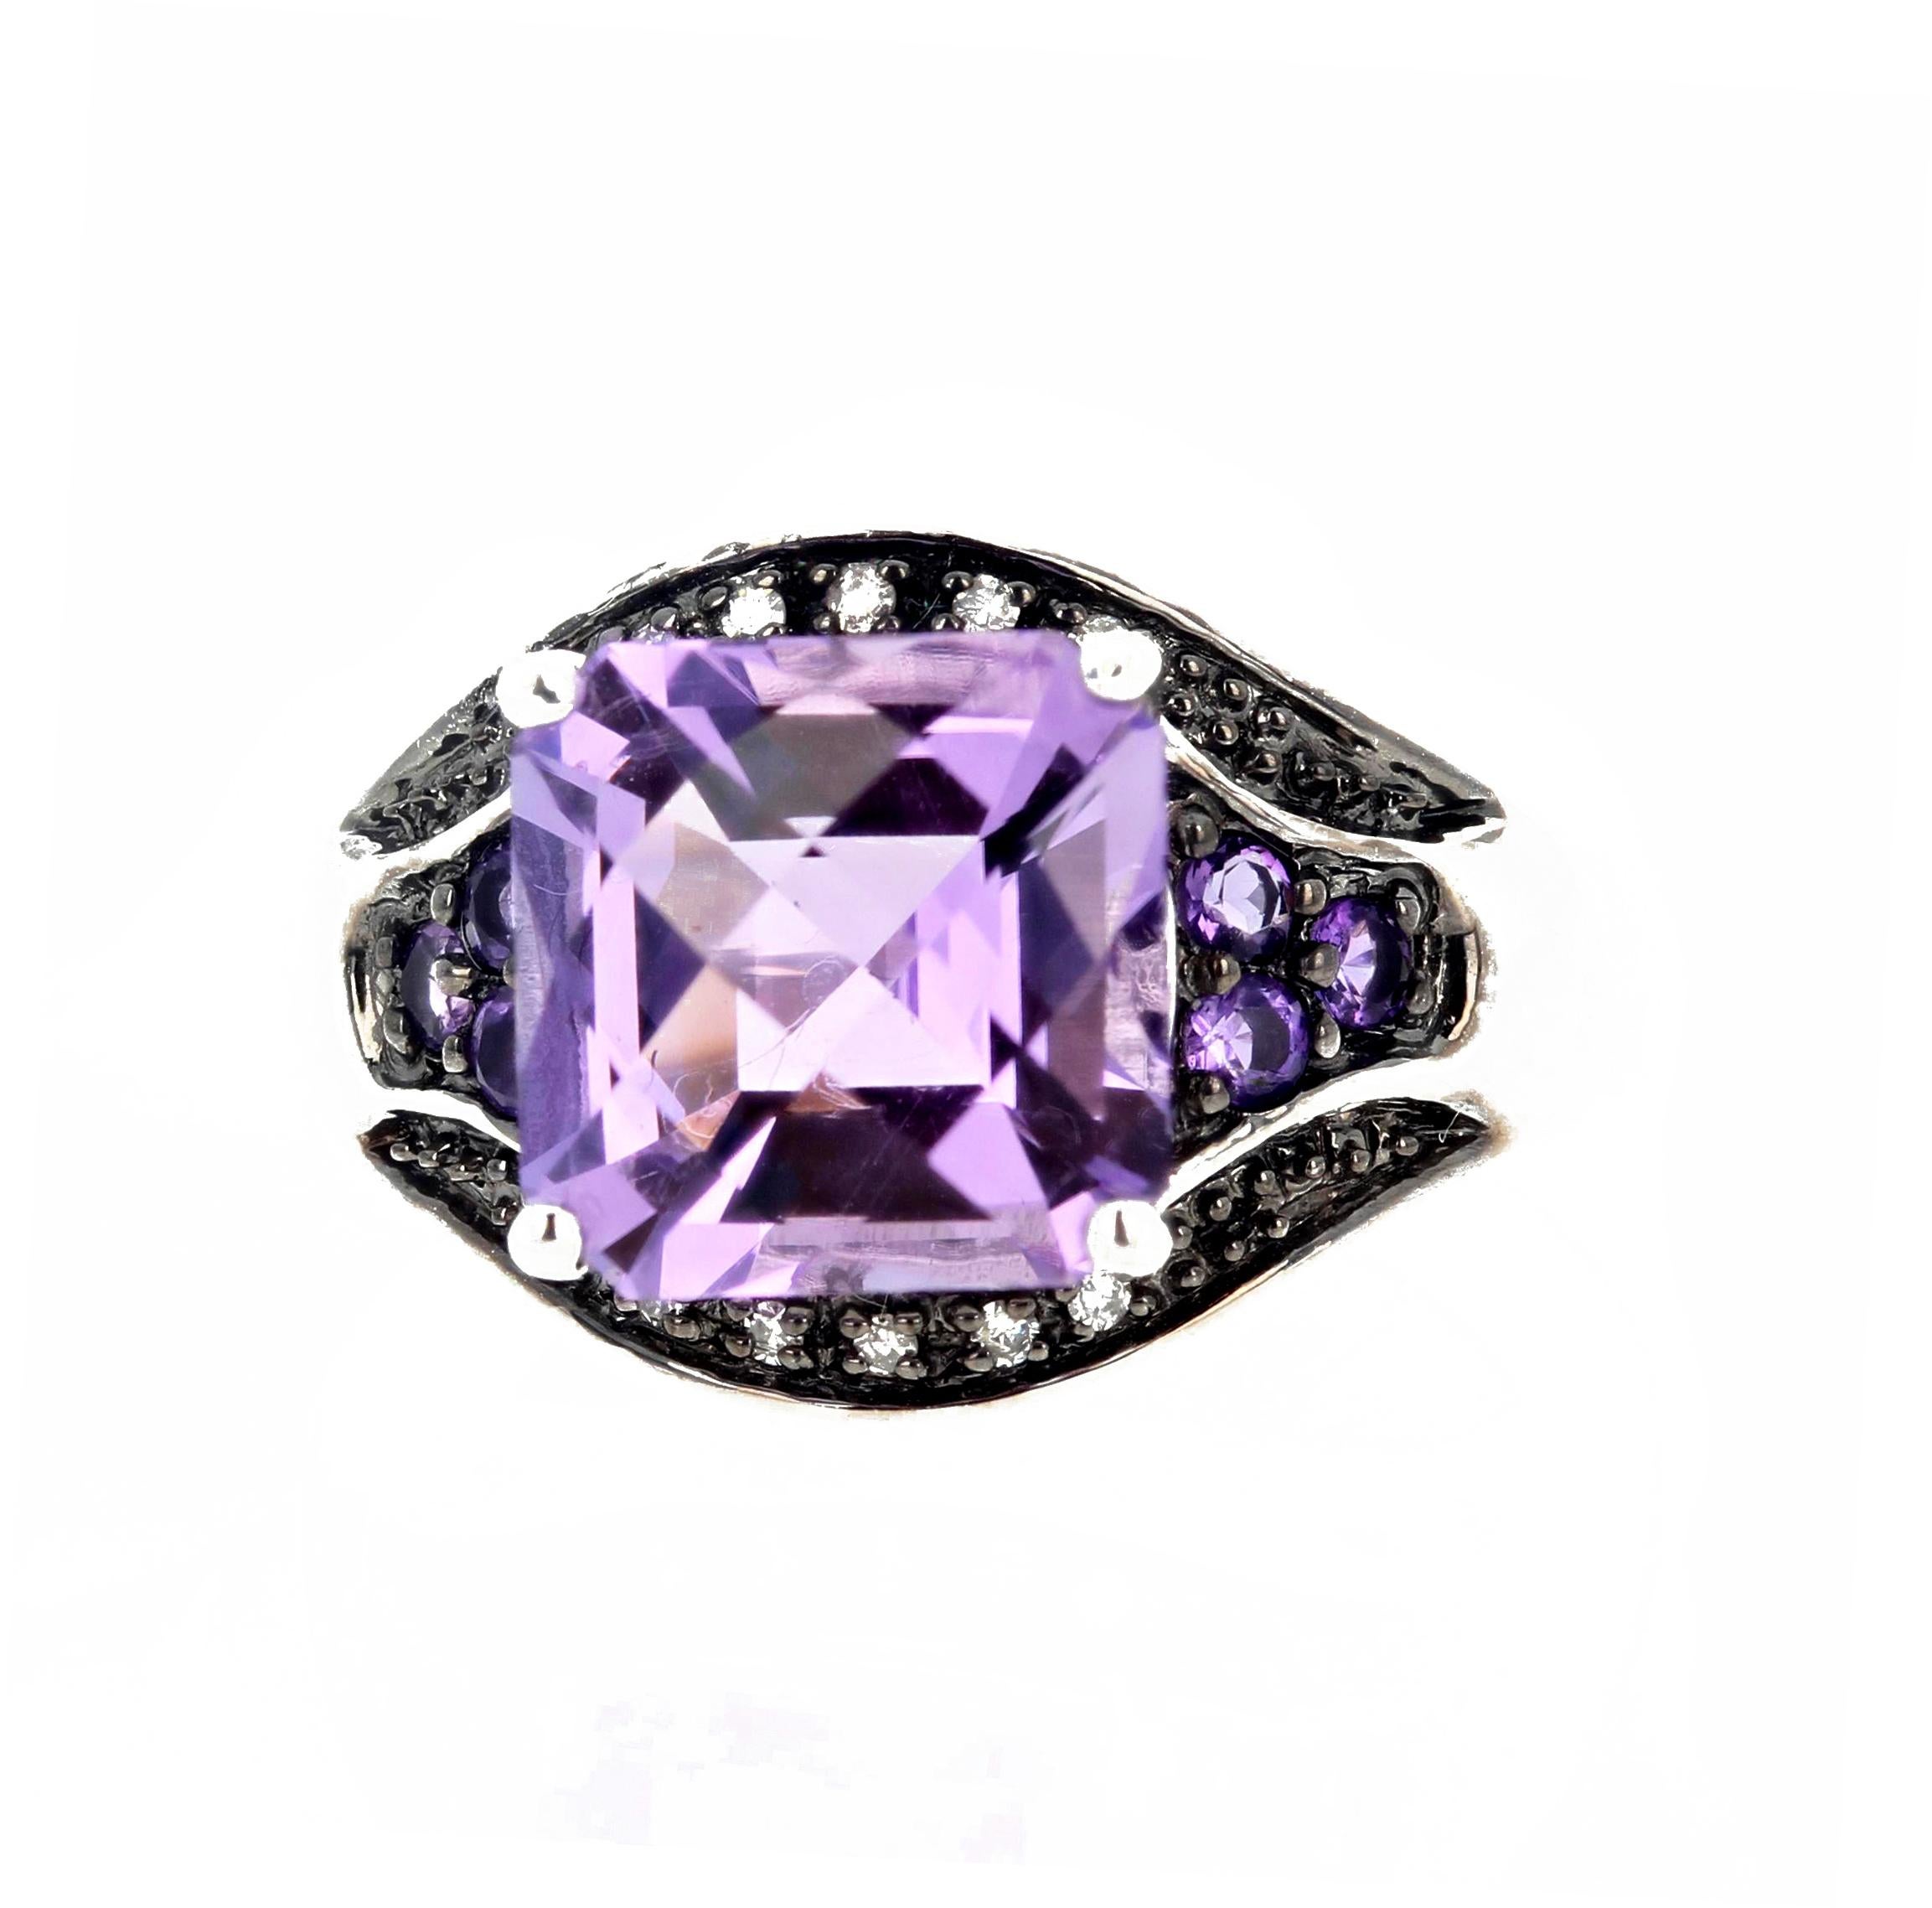 diamond ring with amethyst side stones